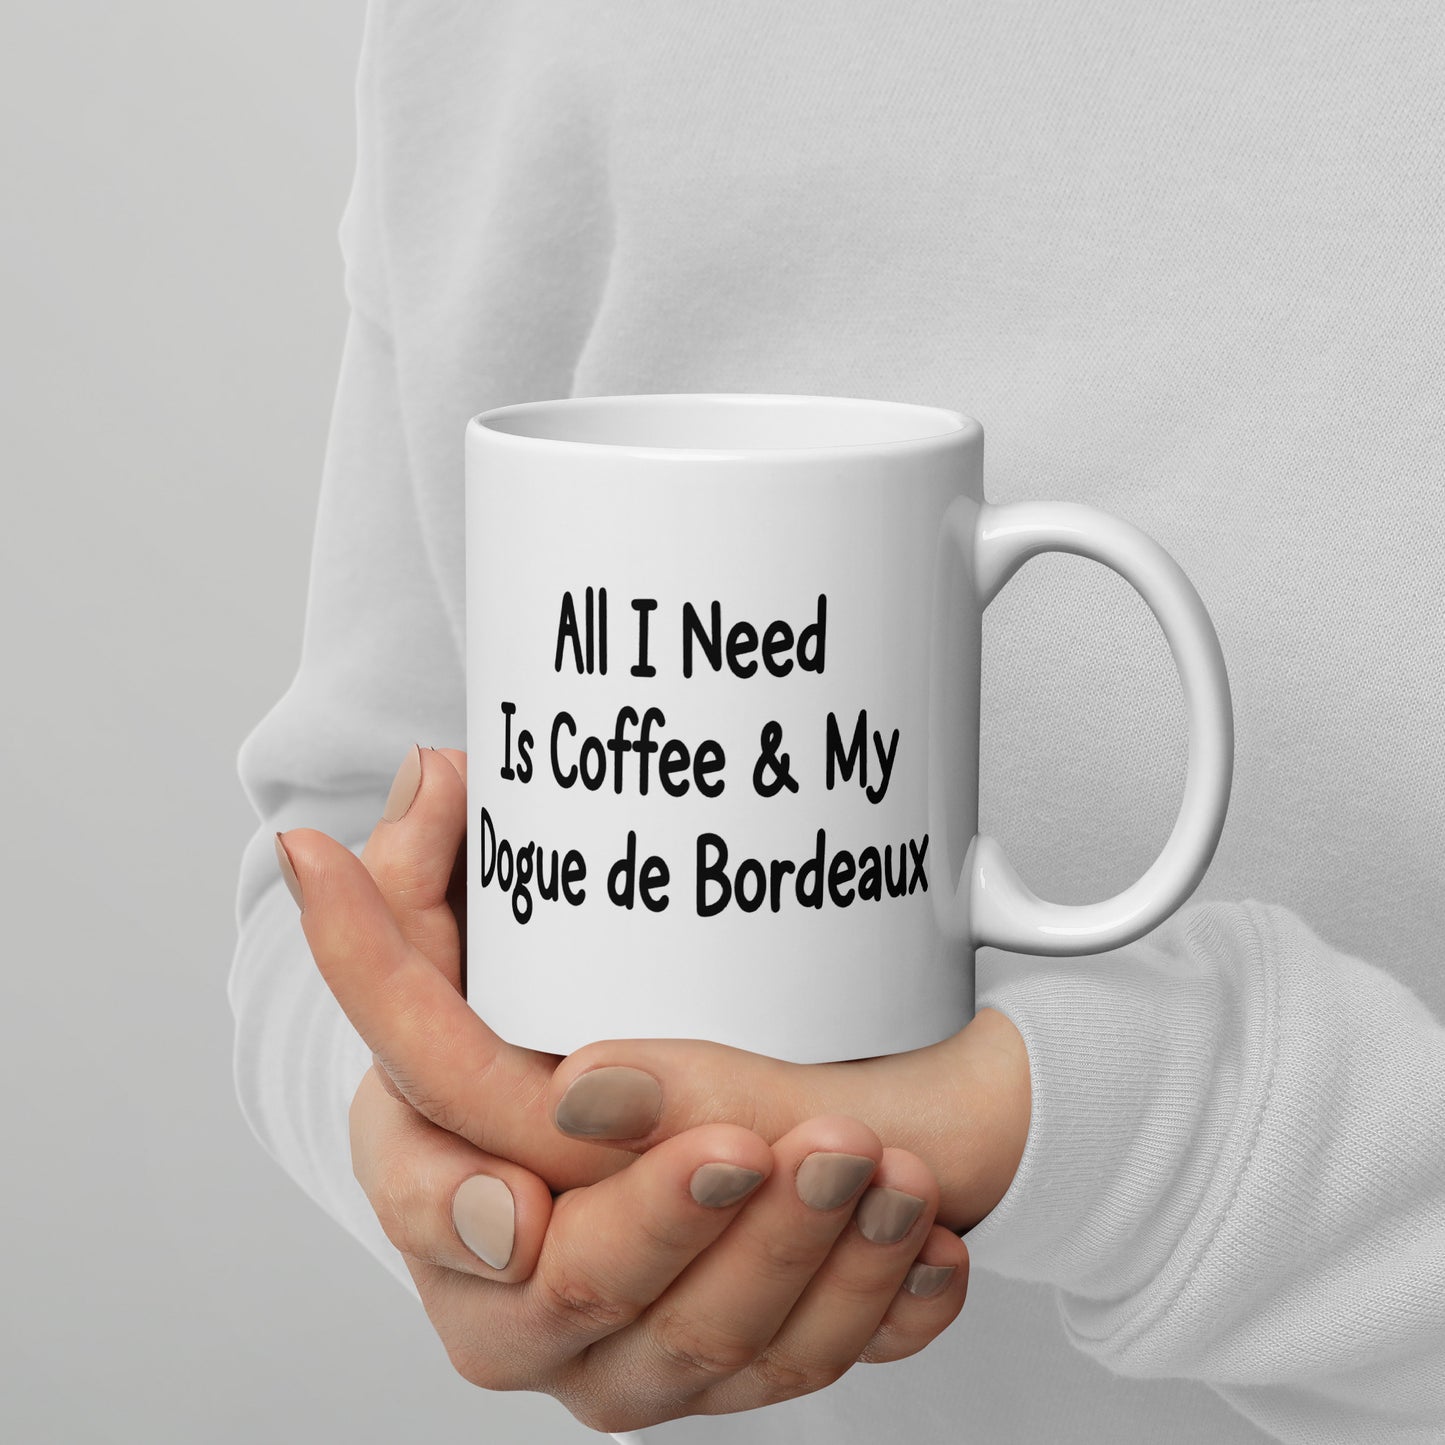 All I need is coffee & my Dogue de Bordeaux mug by Dog Artistry.